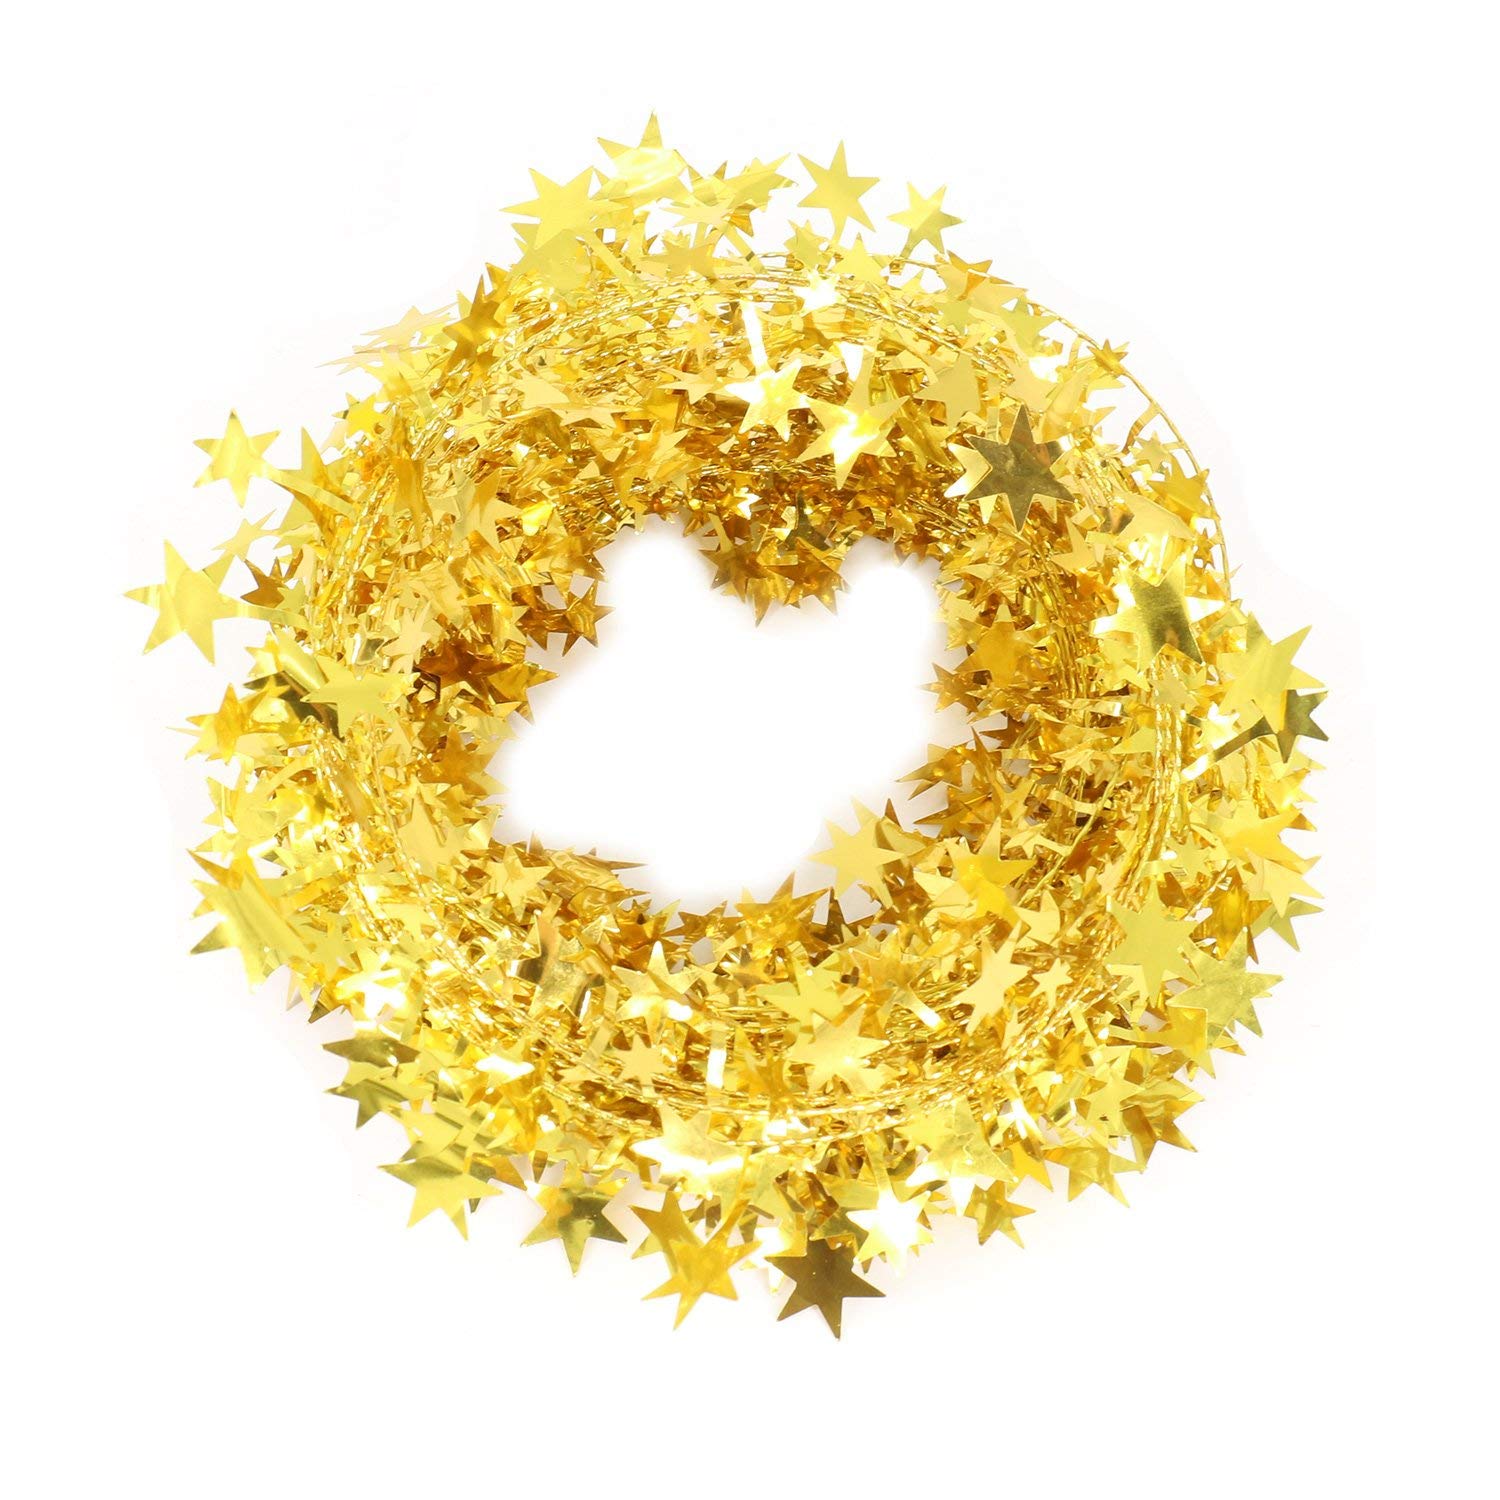 Amazon.com: Christmas Decorations Gold Star Wire Garland - 25 Ft X 2 ...